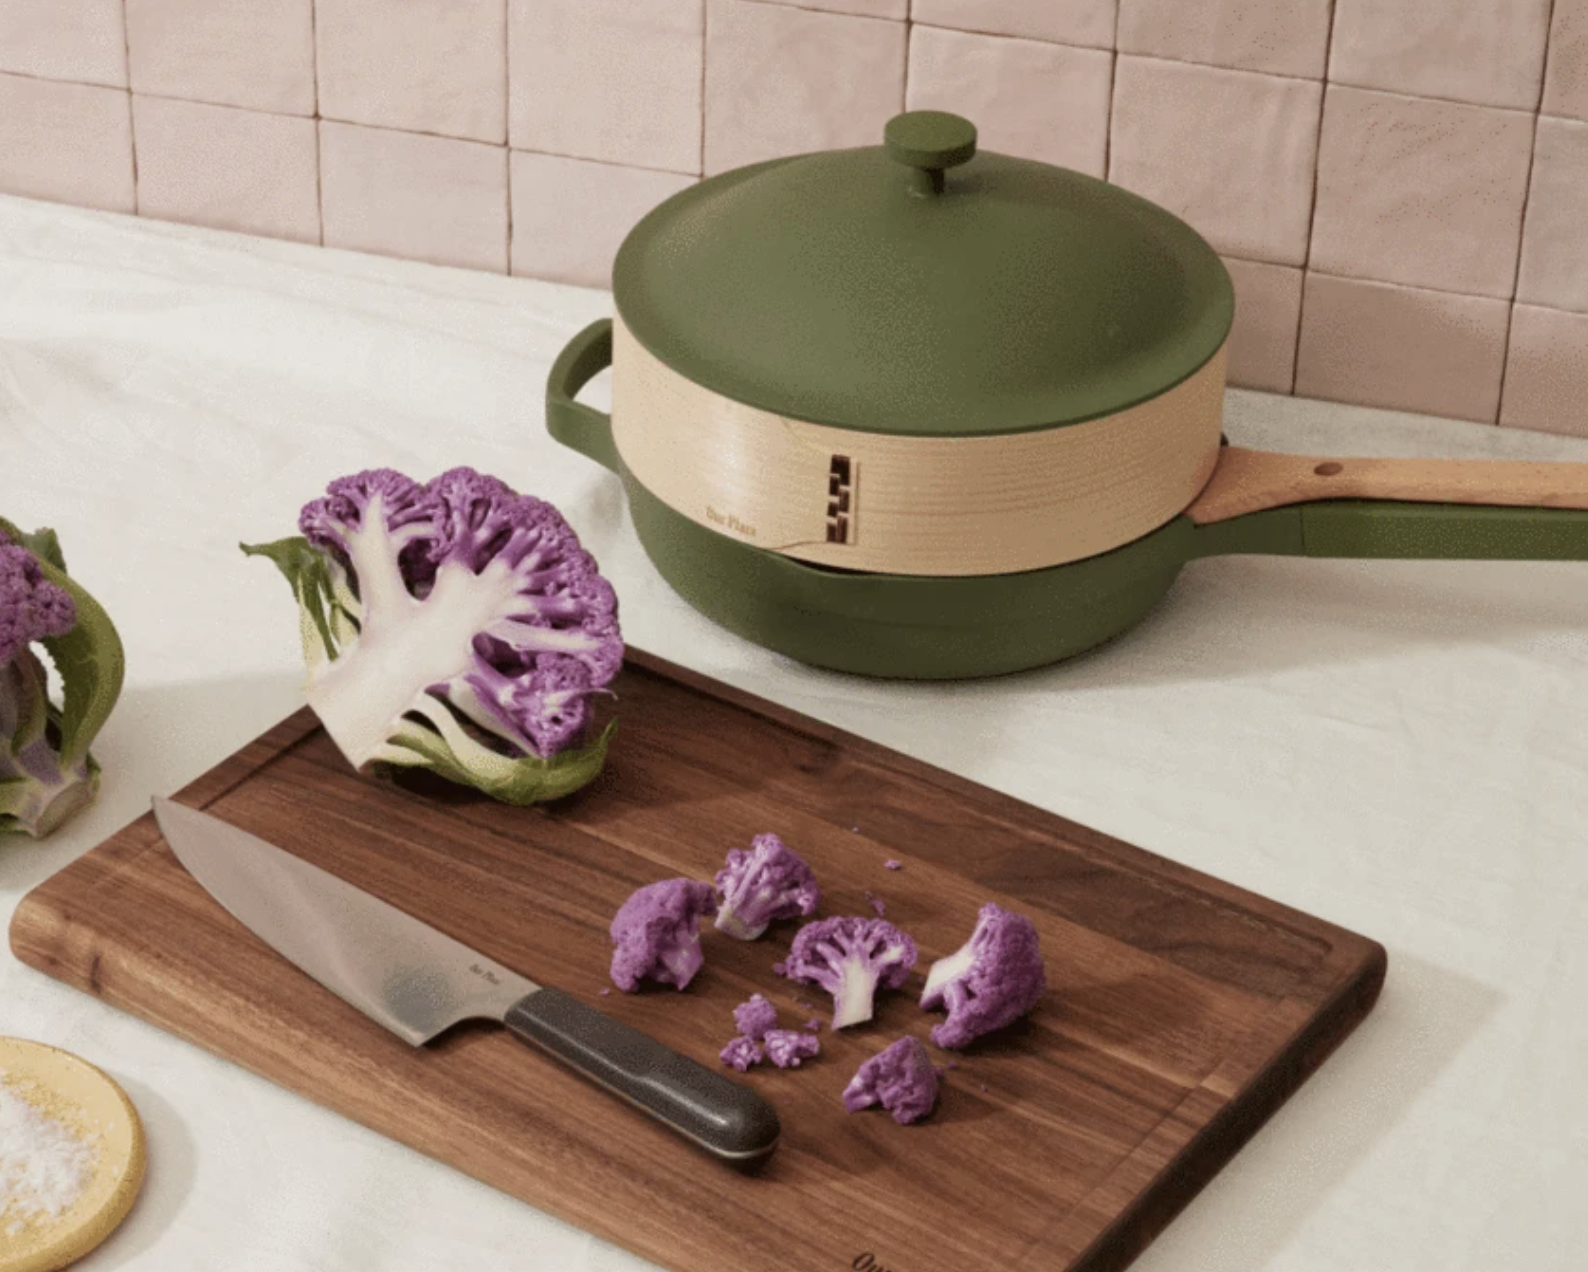 The cutting board with cauliflower on it in front of an Always Pan